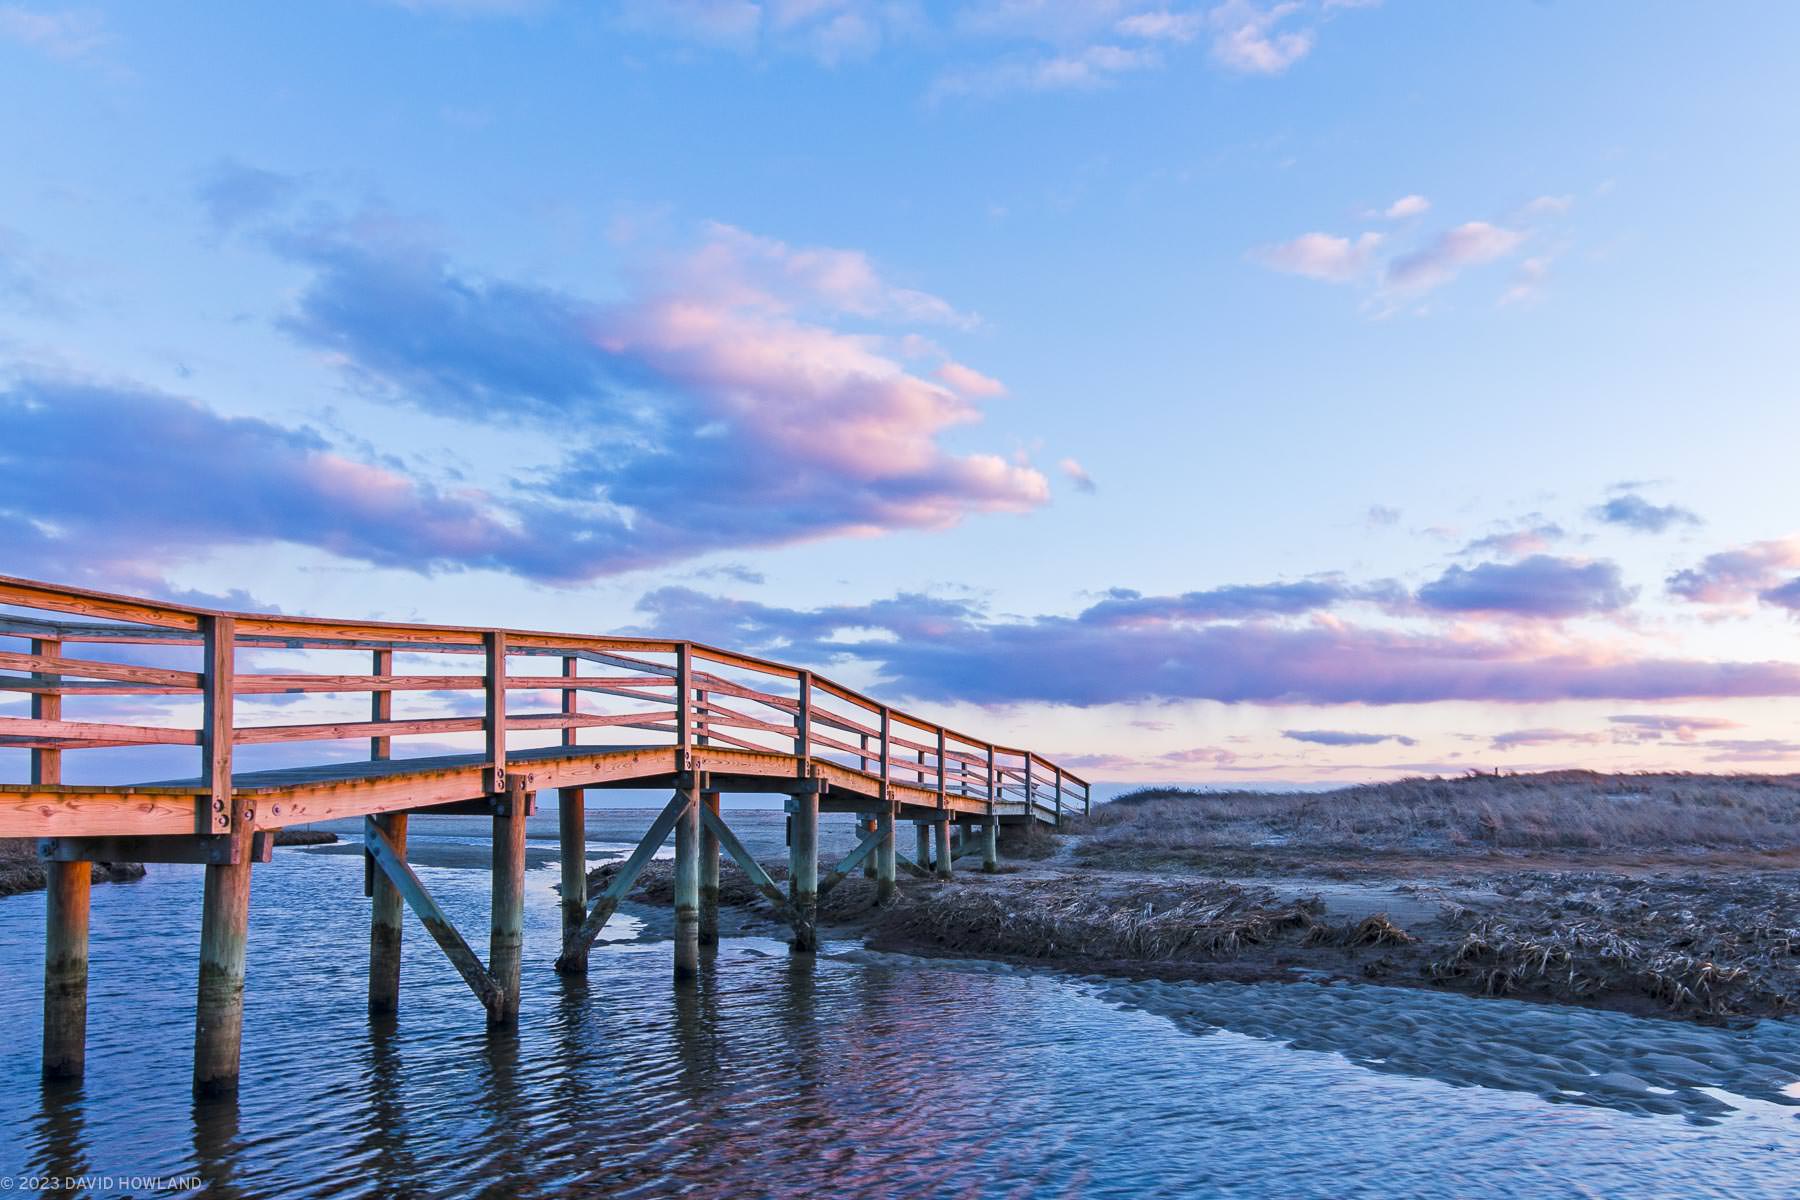 A photo of sunset lighting up the clouds in the sky over a boardwalk crossing a tidal channel at Ridgevale Beach in Chatham, MA.